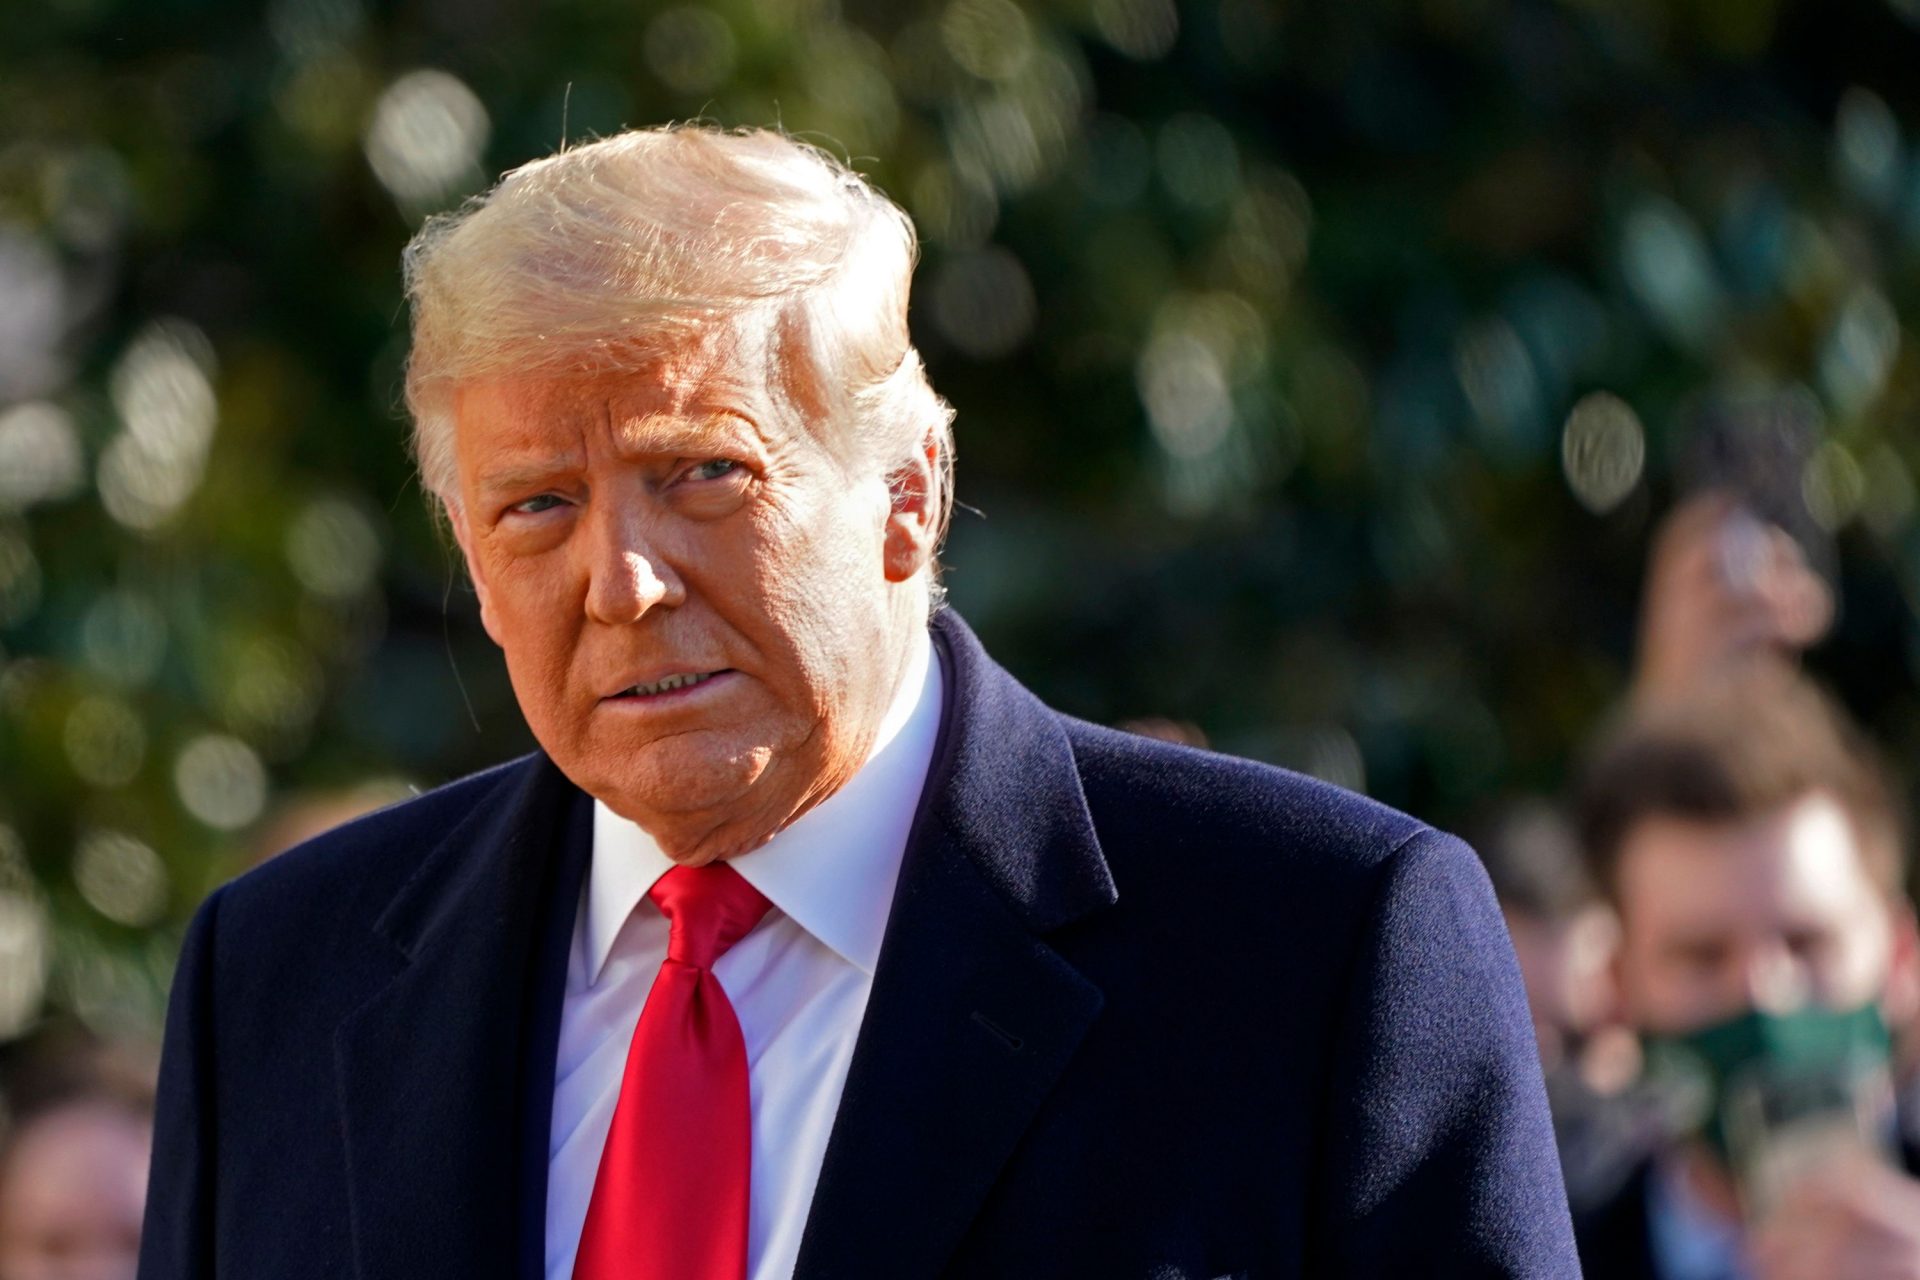 "What they're doing is crazy," Trump blasts Biden's economy as a "Recession"